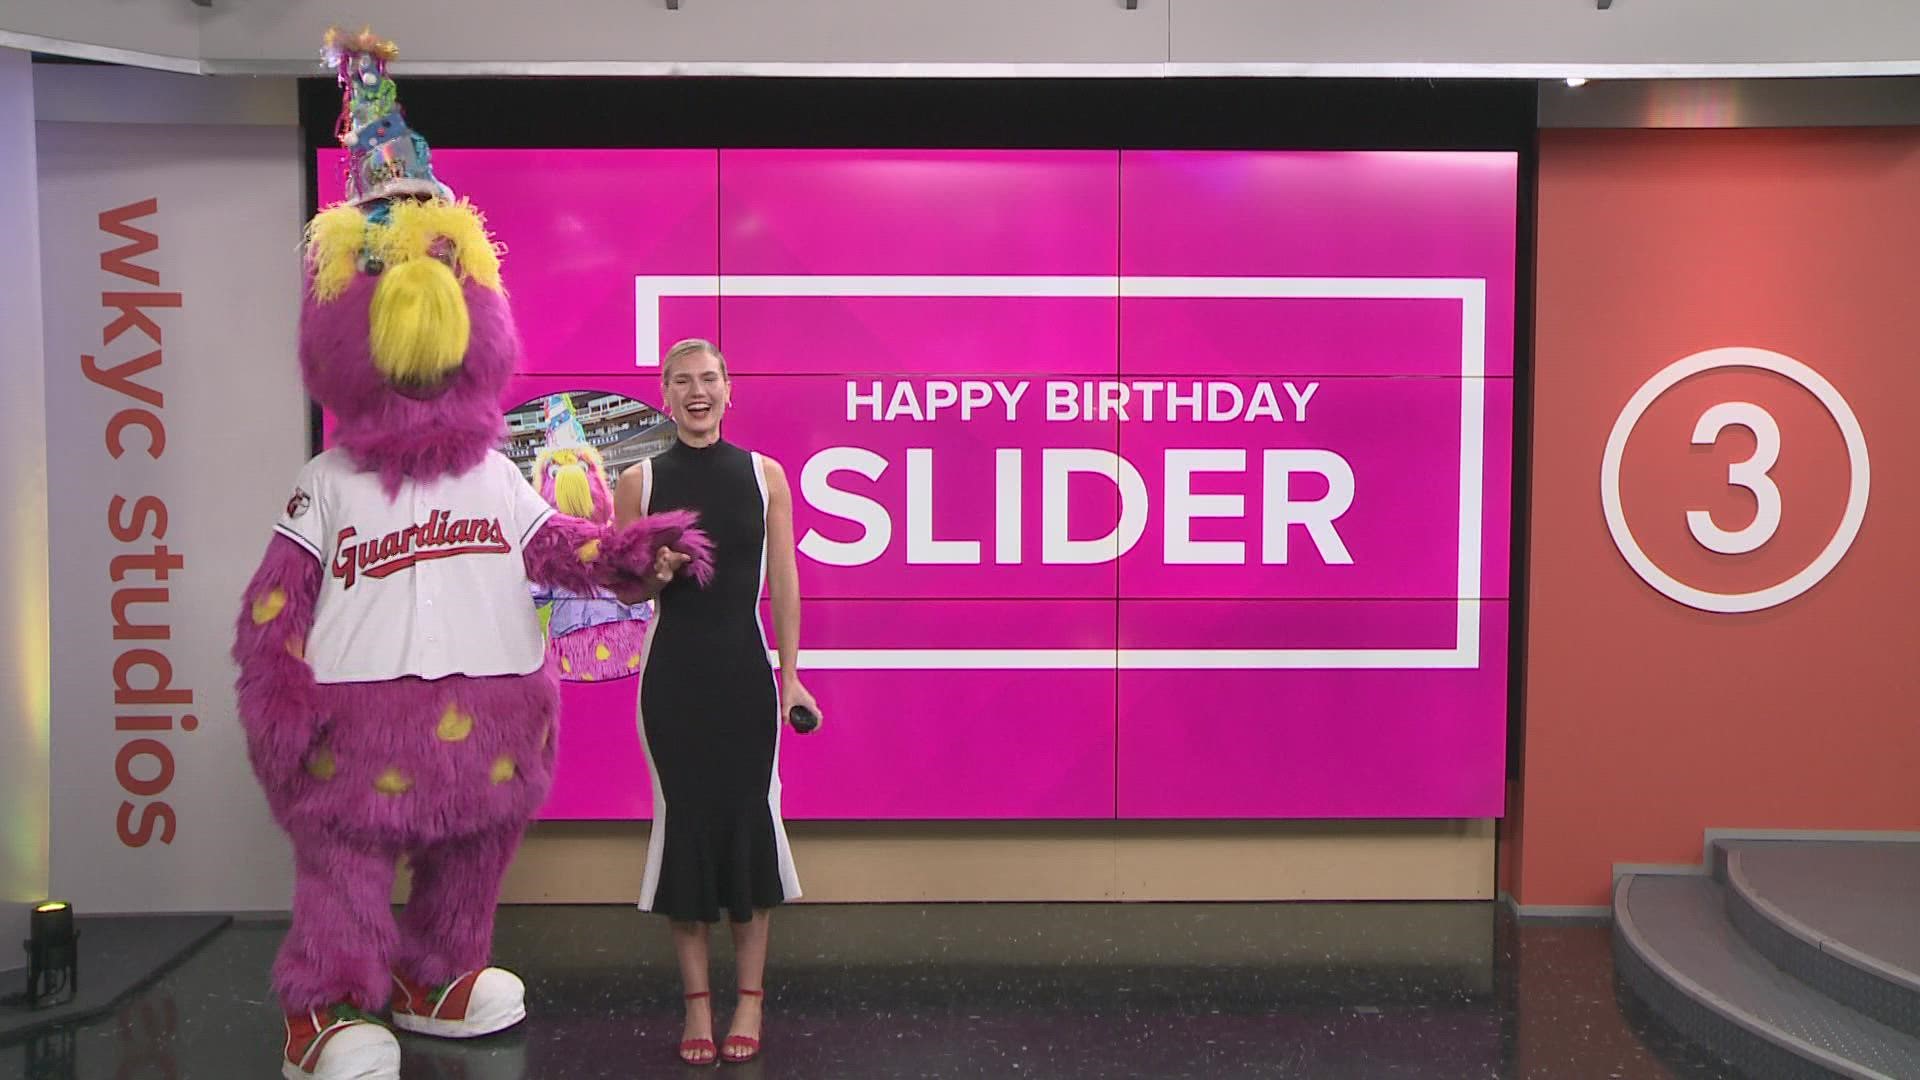 3News' Payton Domschke had a special guest for this weather forecast as Slider of the Cleveland Guardians joined in for his birthday.